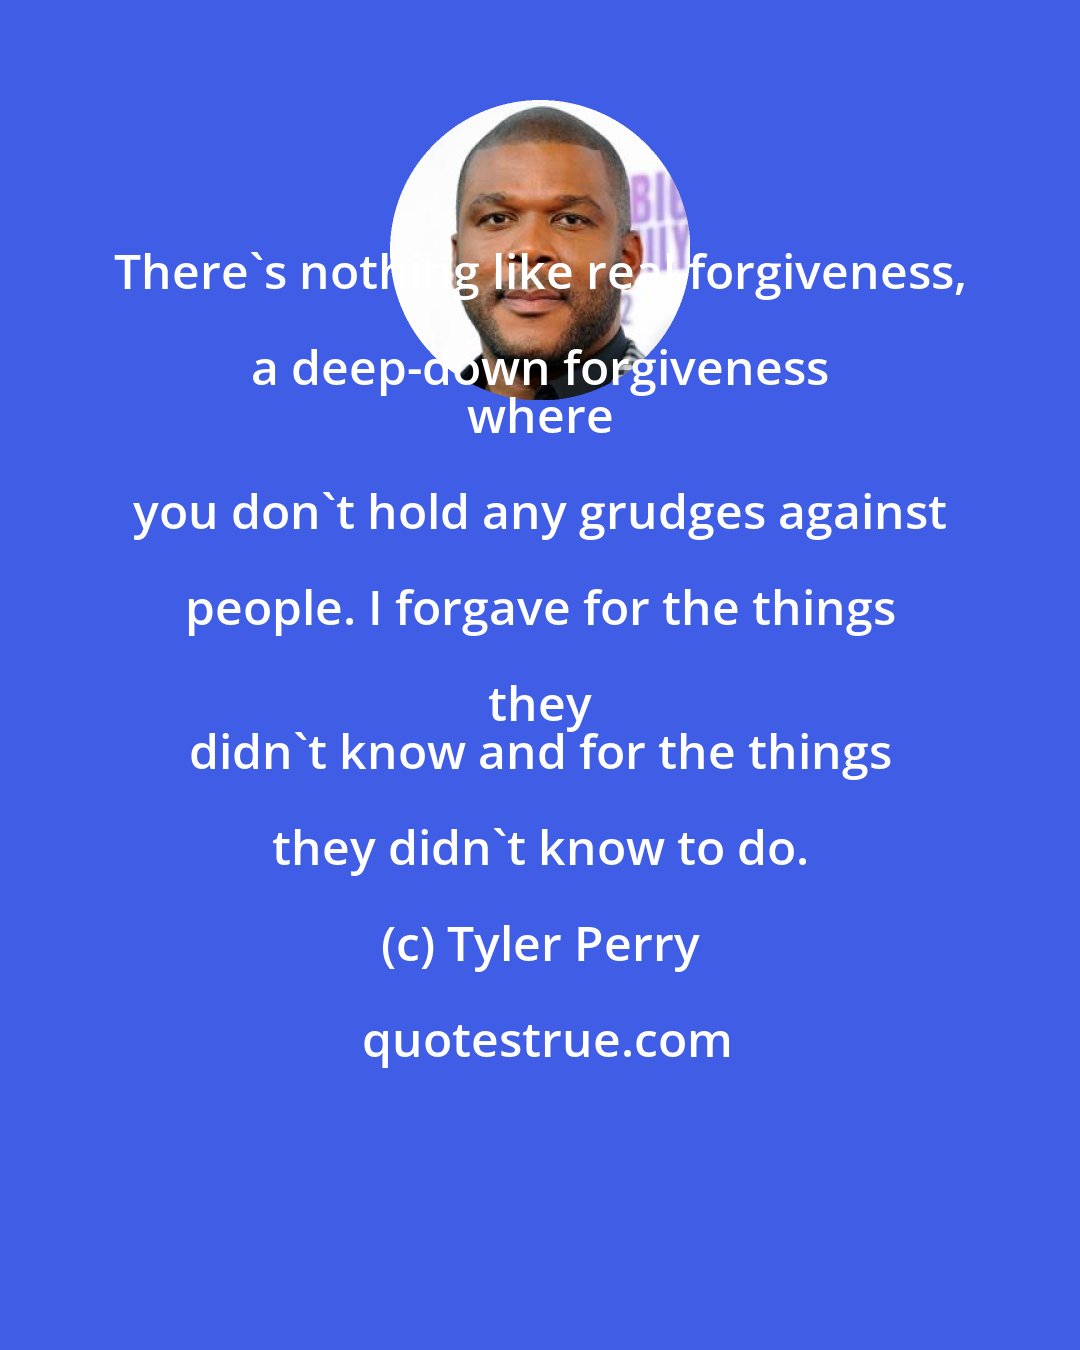 Tyler Perry: There's nothing like real forgiveness, a deep-down forgiveness 
 where you don't hold any grudges against people. I forgave for the things they 
 didn't know and for the things they didn't know to do.